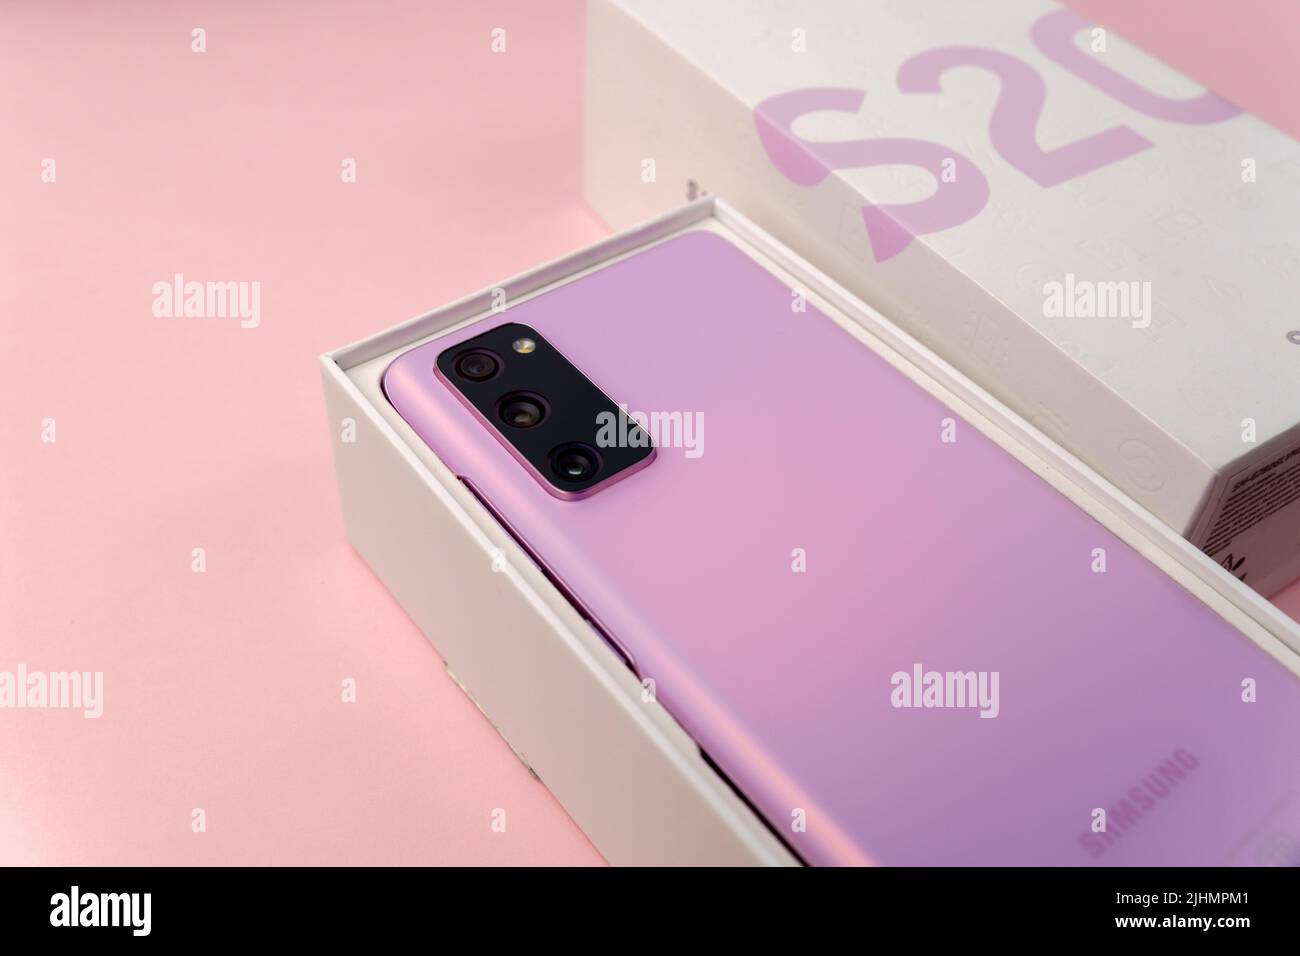 Tyumen, Russia-July 18, 2022: Samsung S20 FE cellphone, Fan Edition. Samsung is a South Korean multinational electronics company. Stock Photo